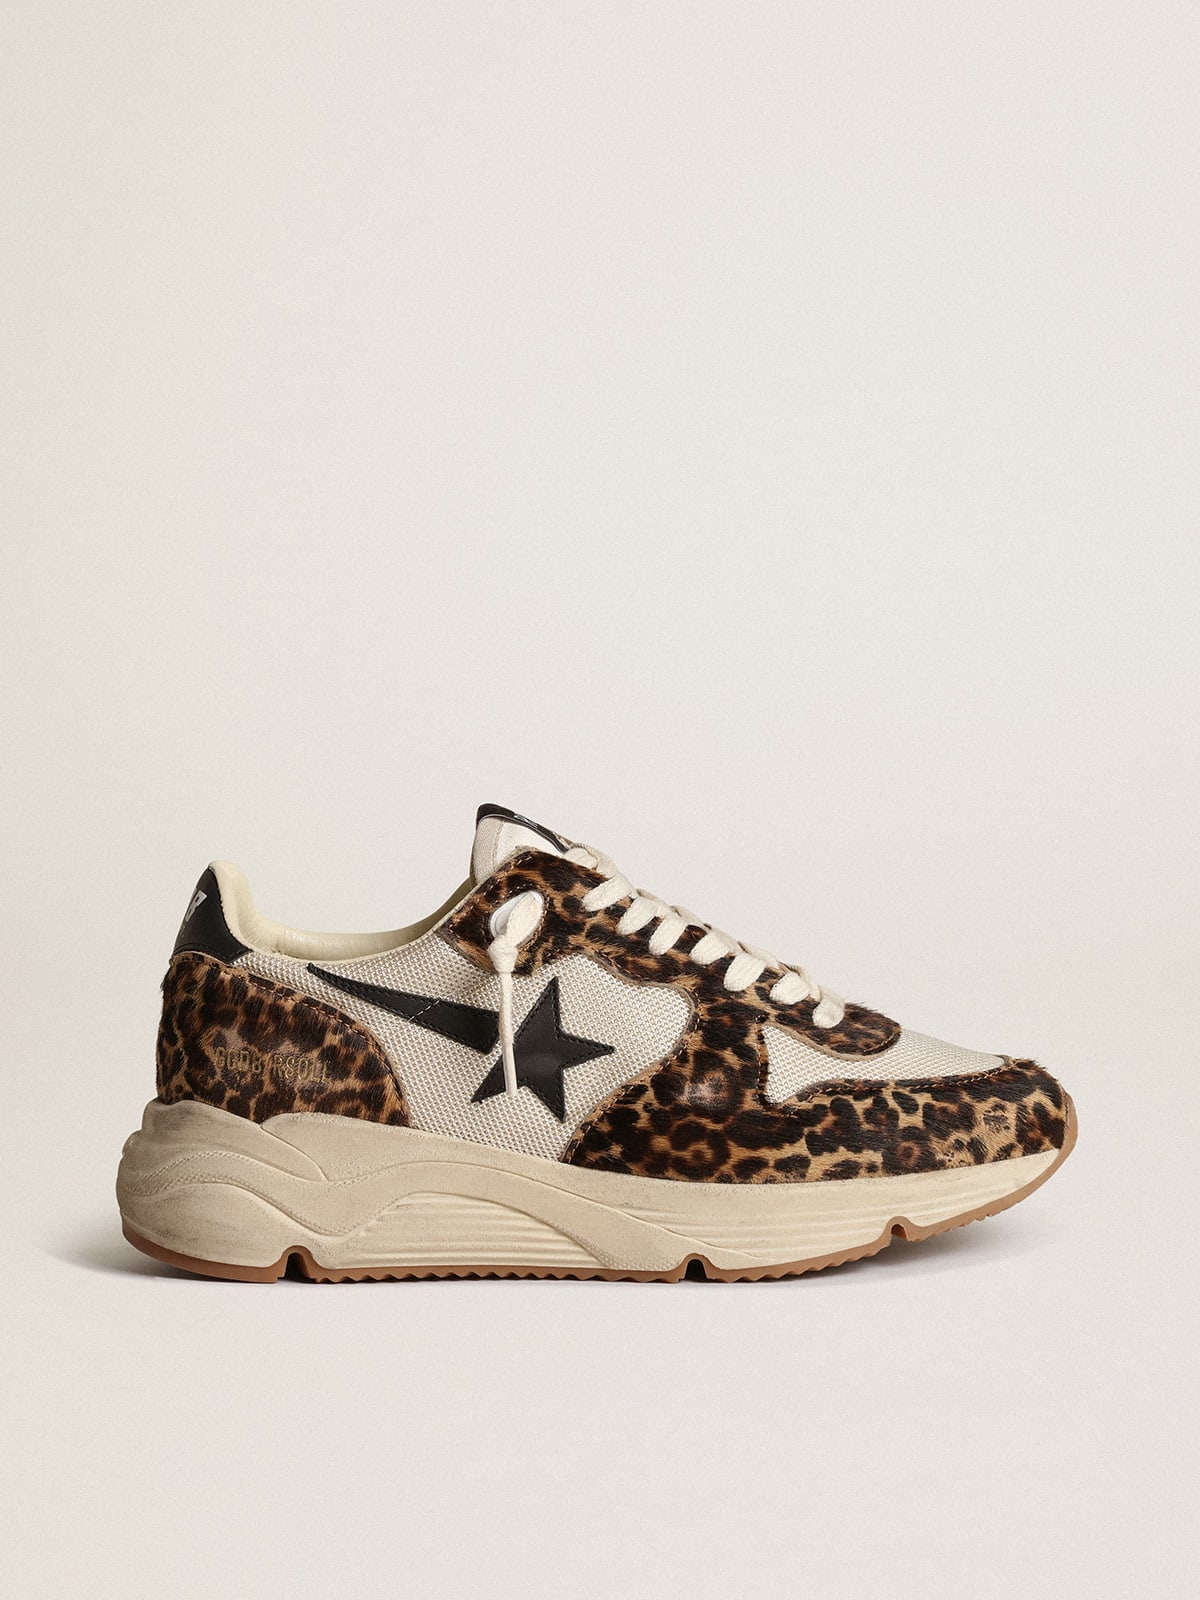 Running Sole sneakers in cream-colored mesh with leopard-print pony skin inserts and black leather star